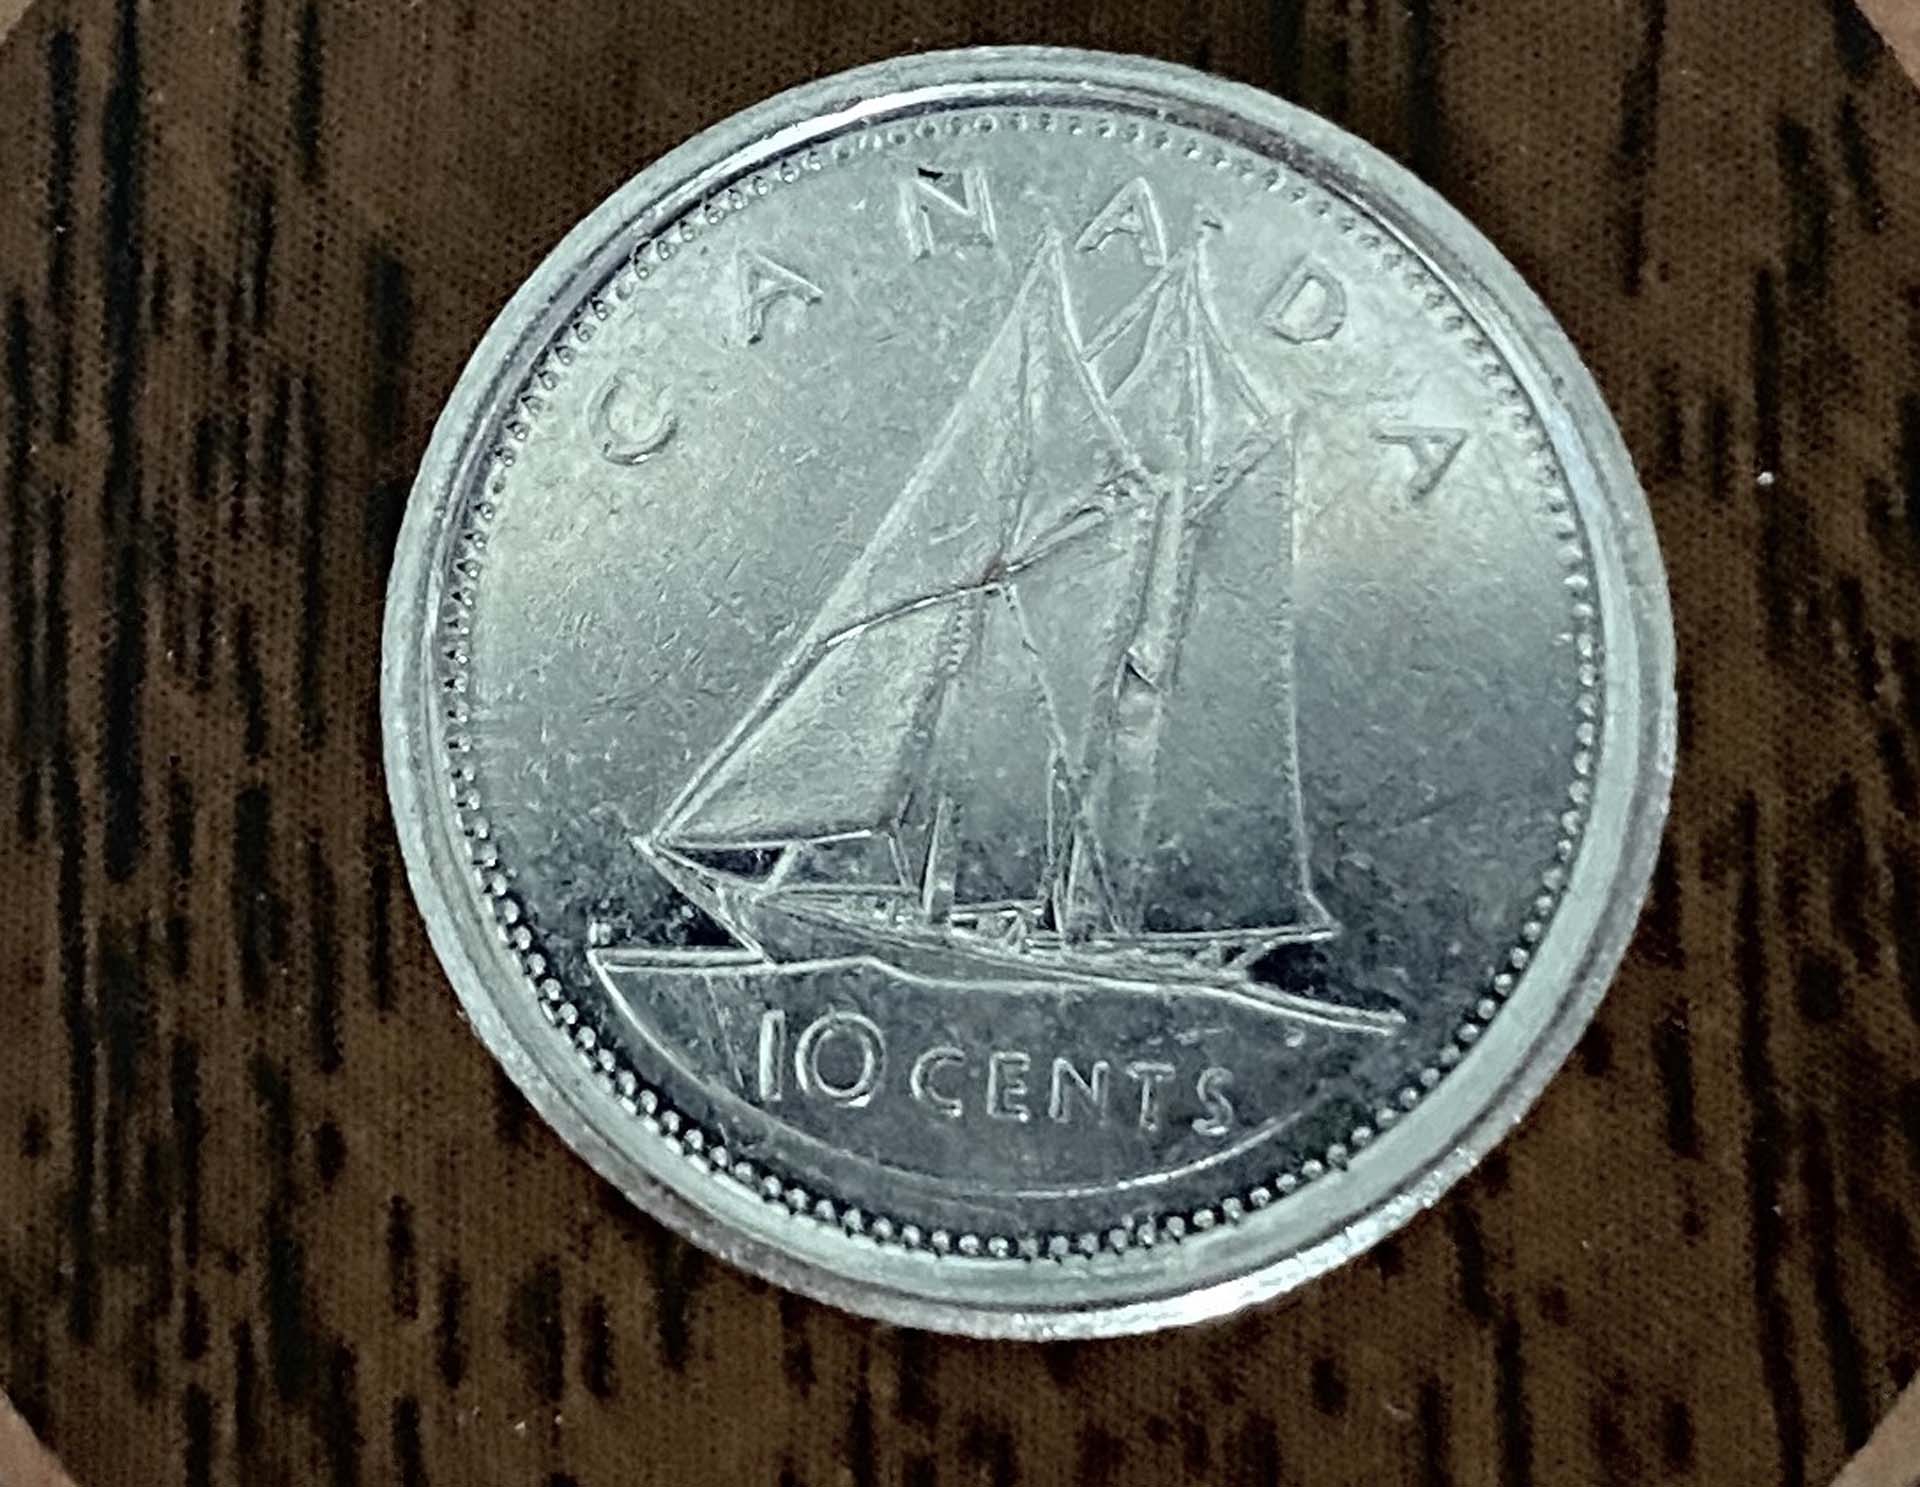 candian dime with bluenose on it. 